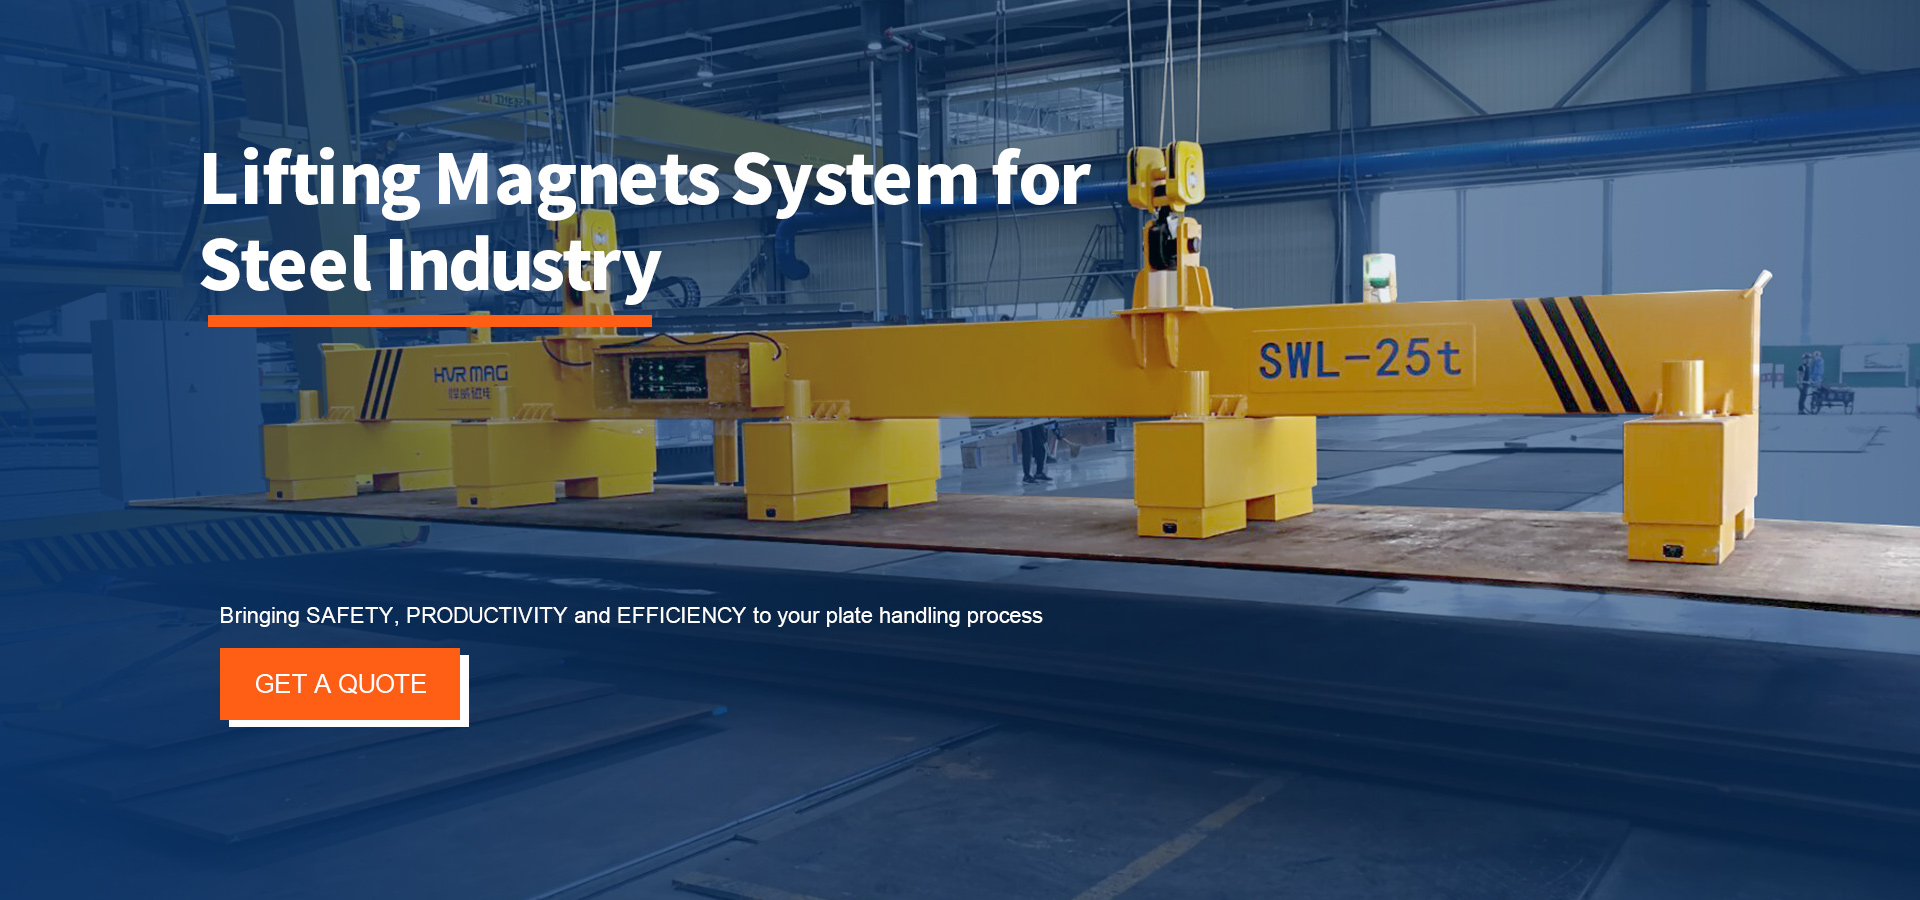 Steel Magnetic Lifters Permanent Lifting Electromagnets - HVR MAG